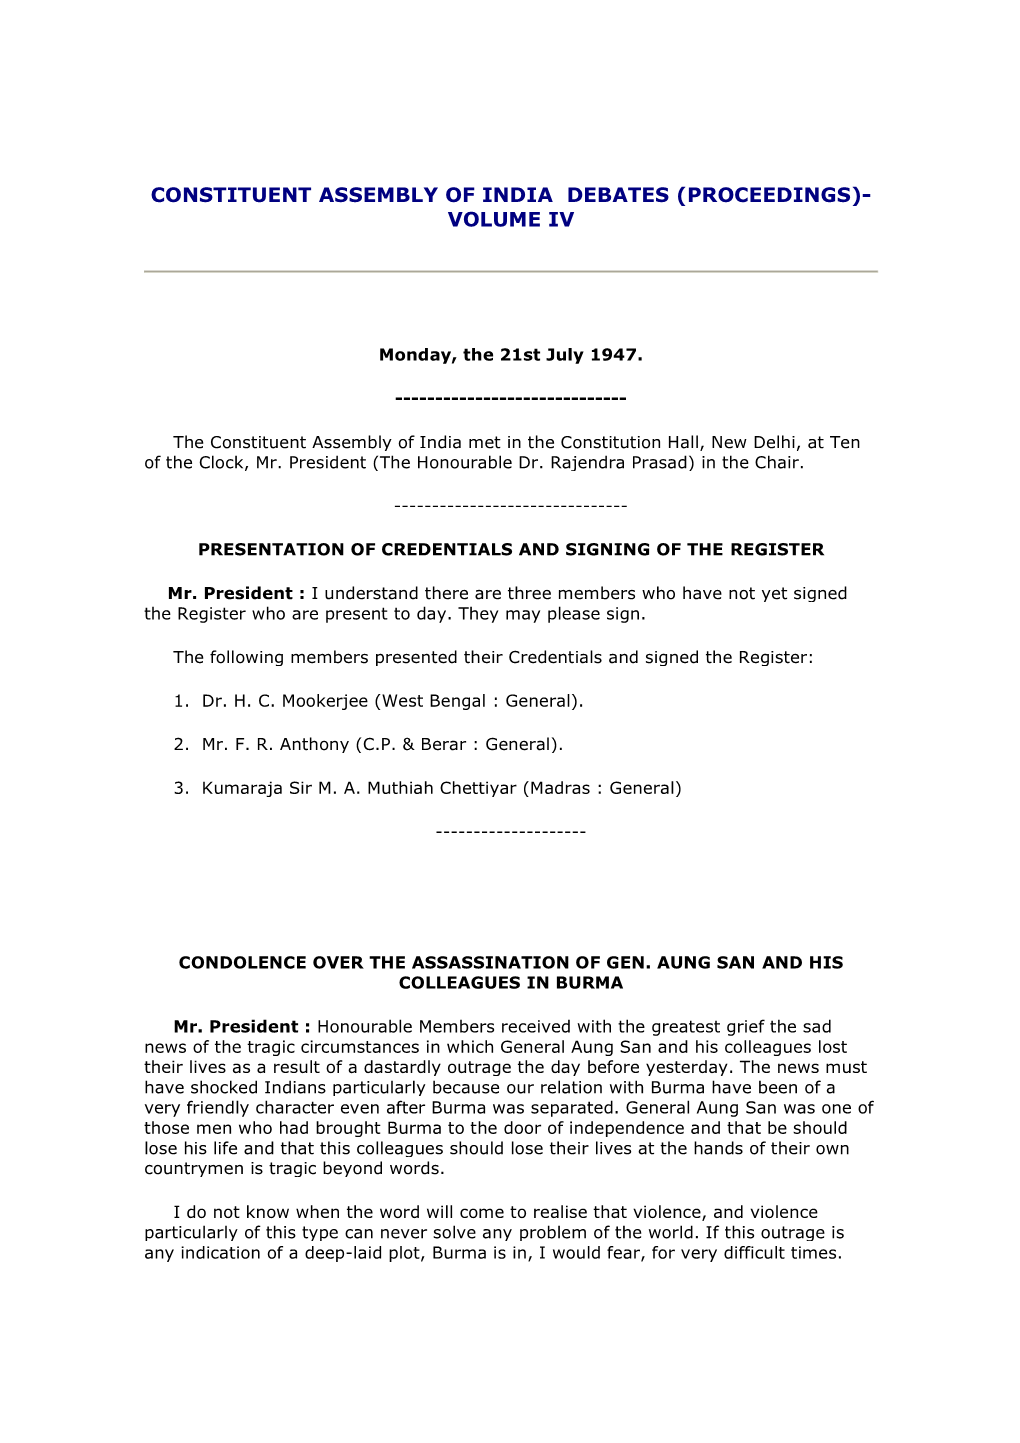 Constituent Assembly of India Debates (Proceedings)- Volume Iv